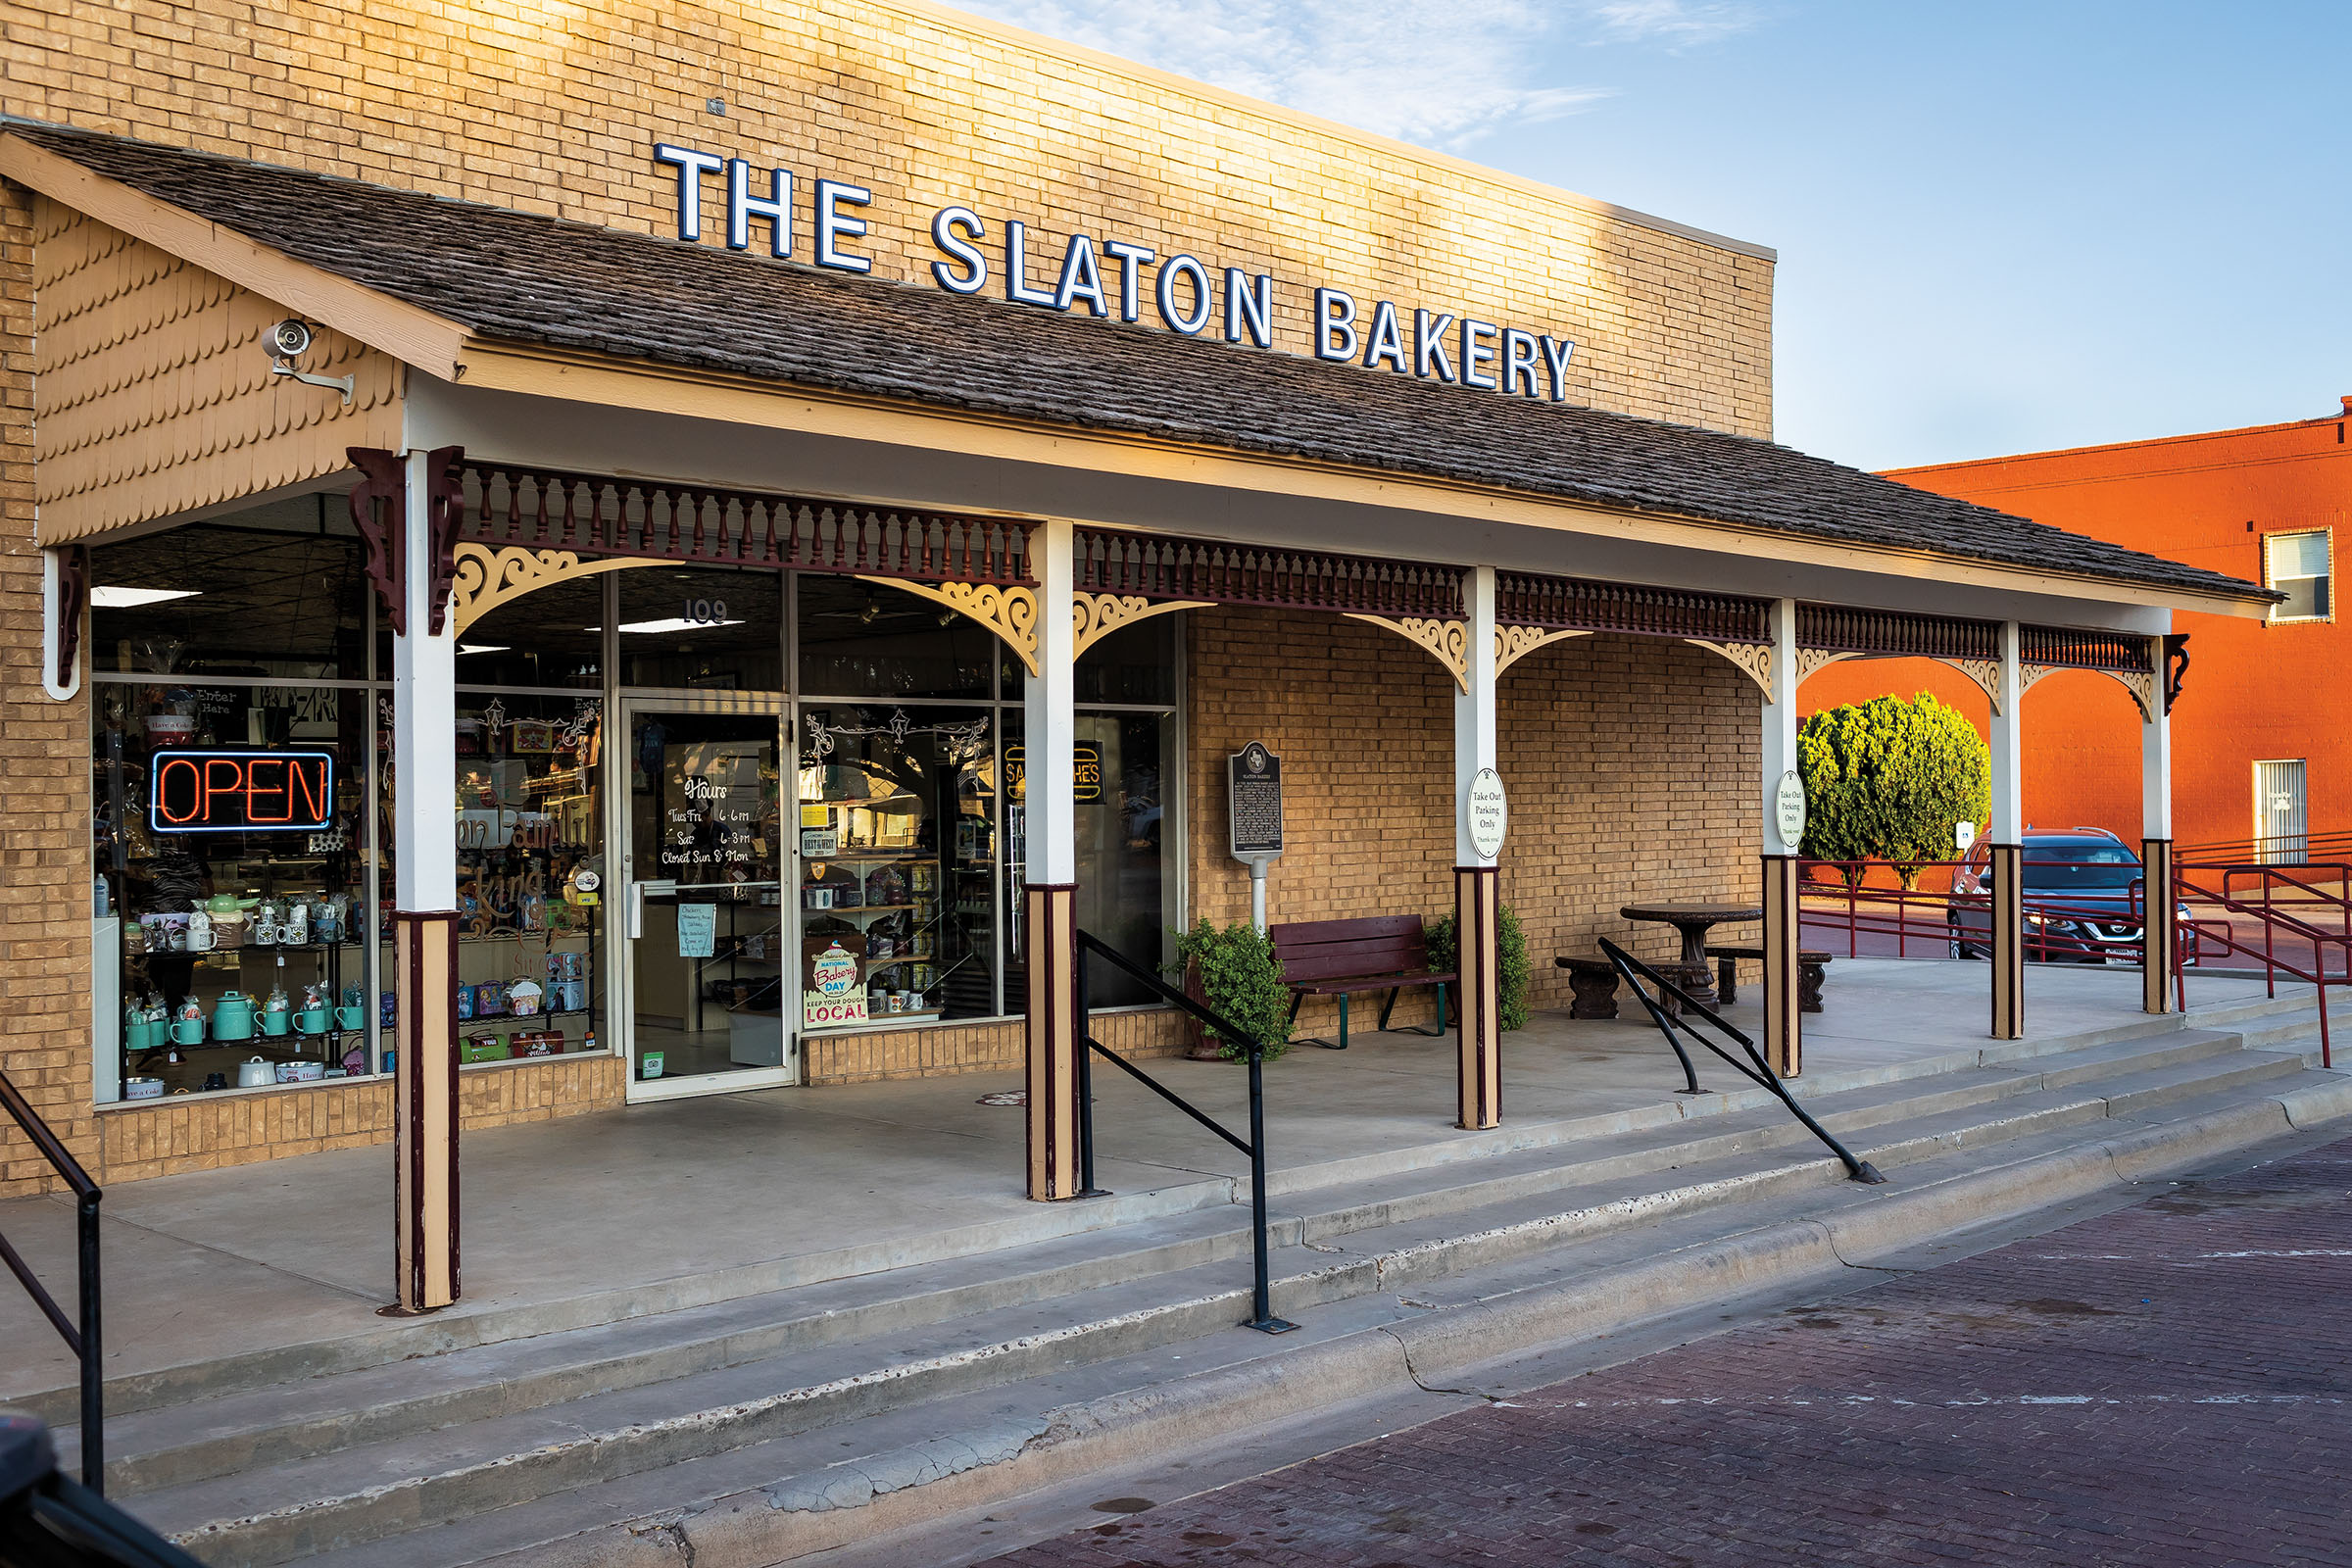 The brick exterior of a building with a sign reading "Slaton Bakery"